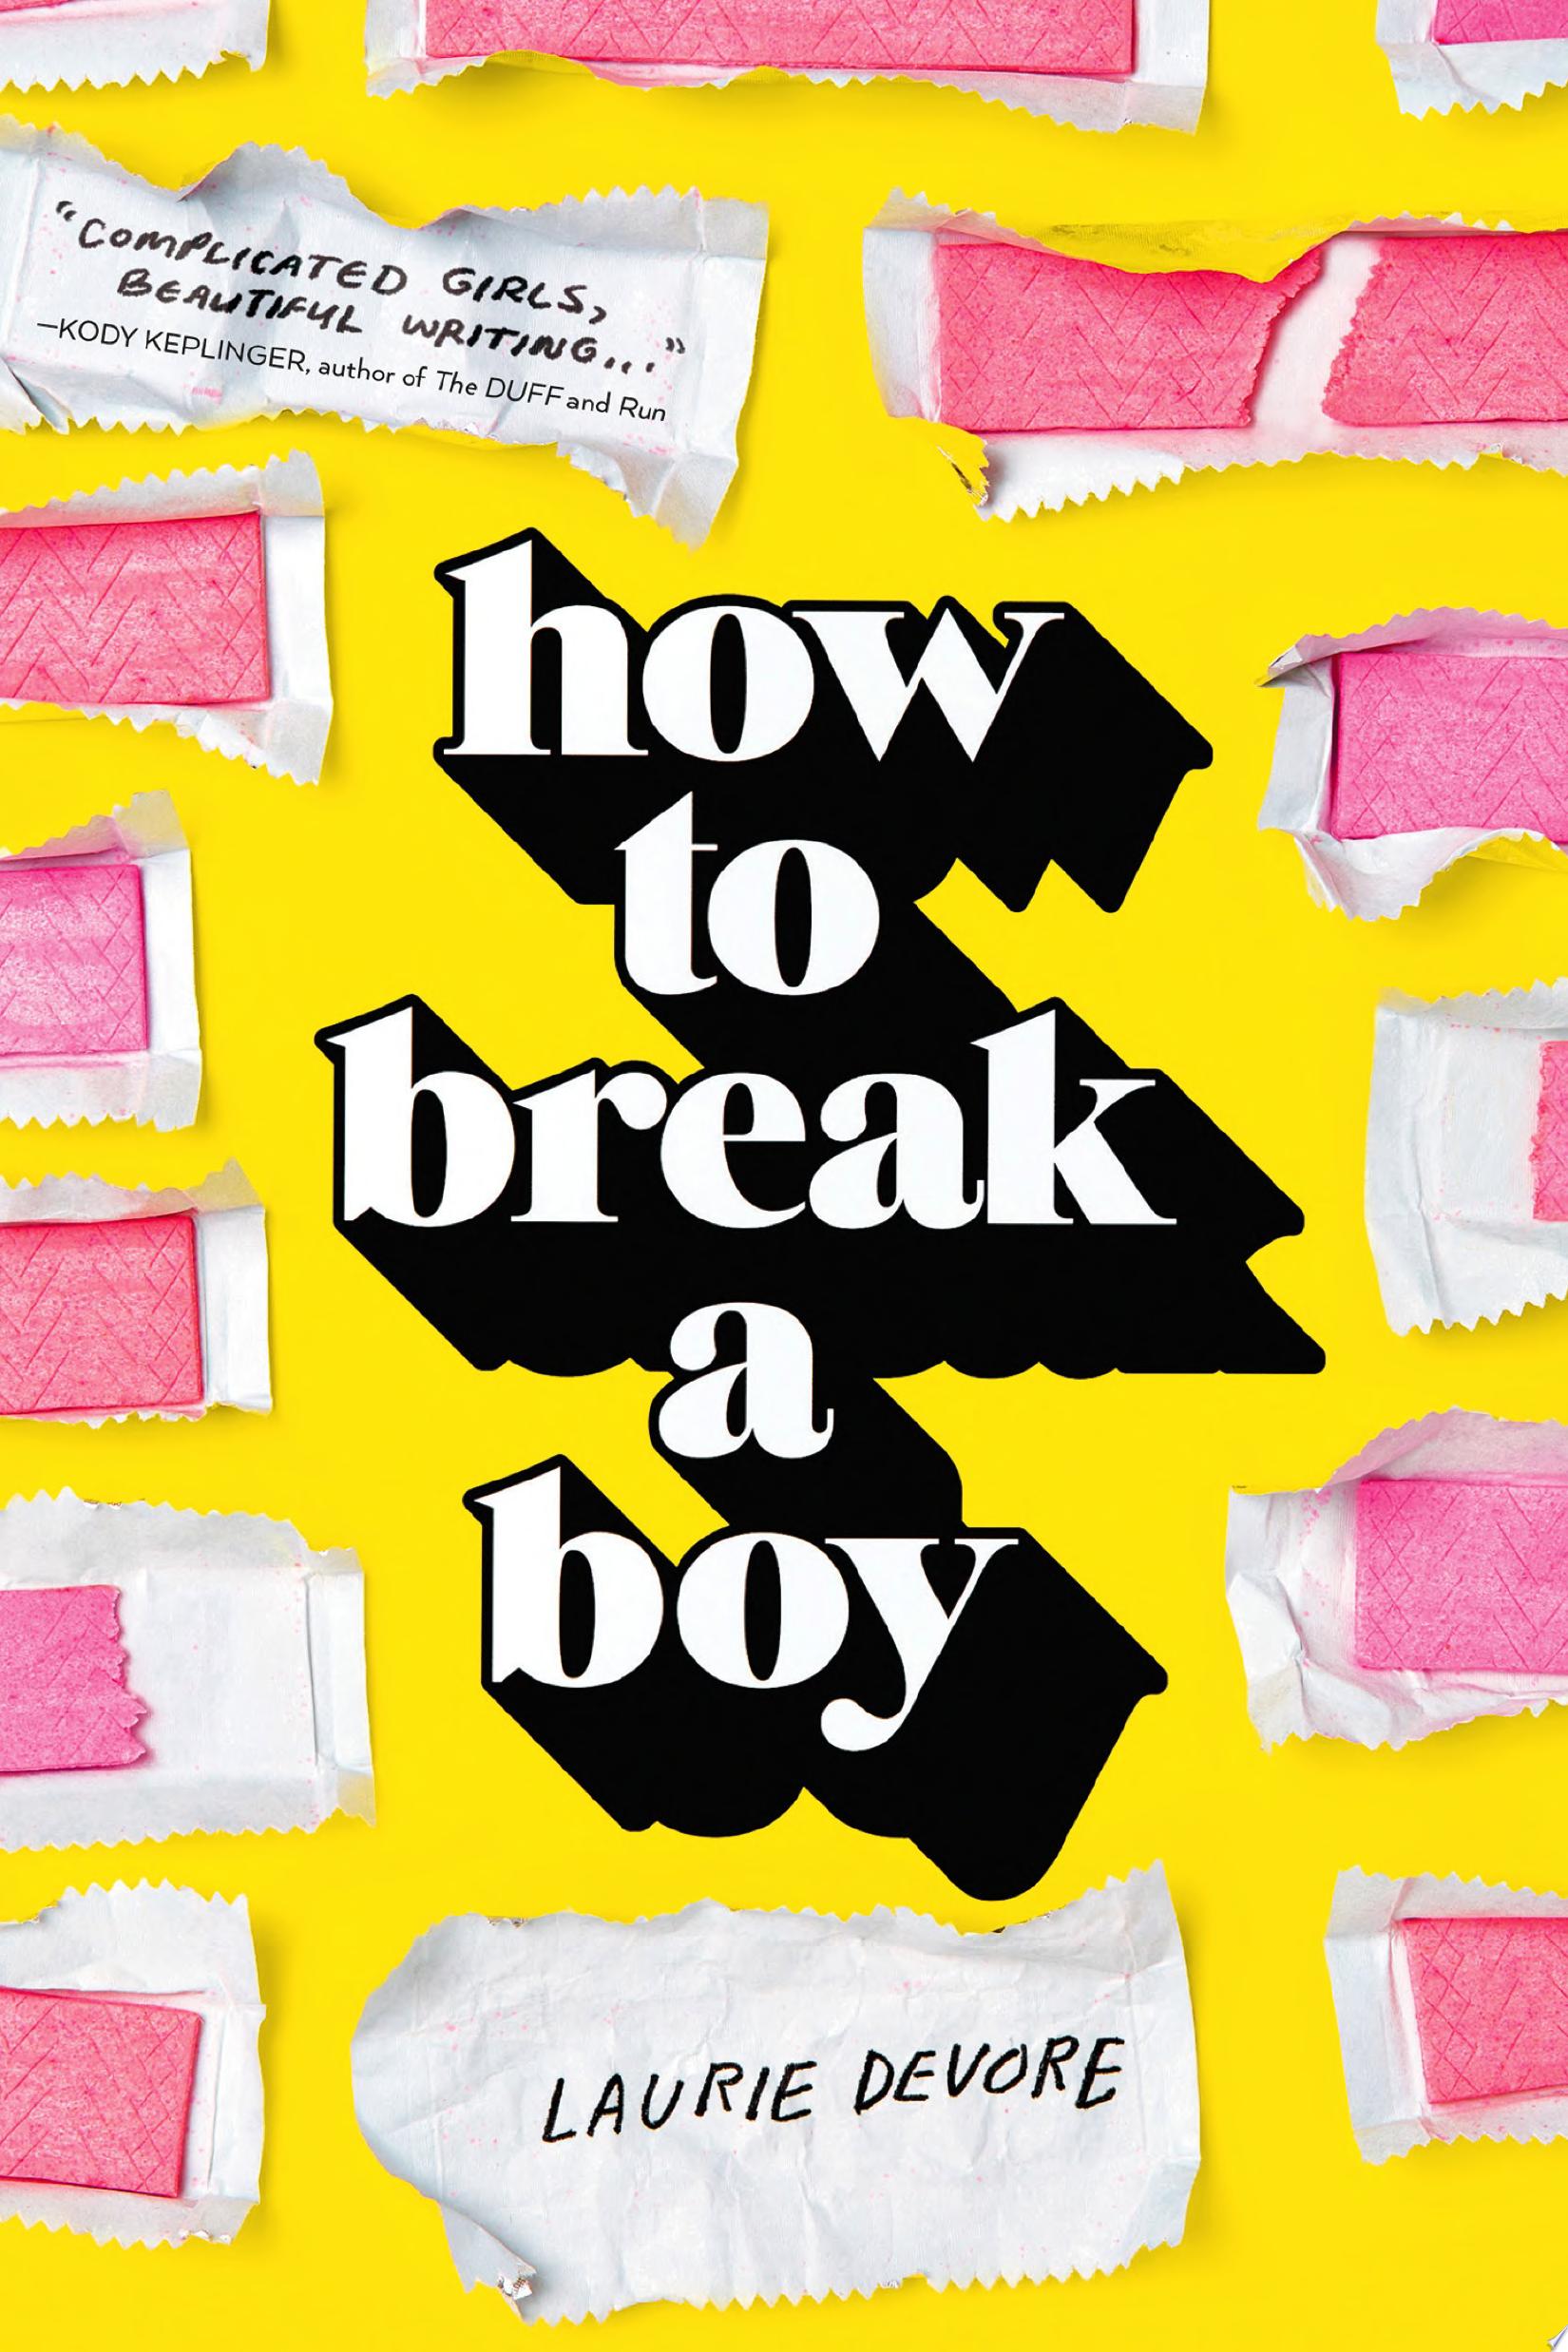 Image for "How to Break a Boy"